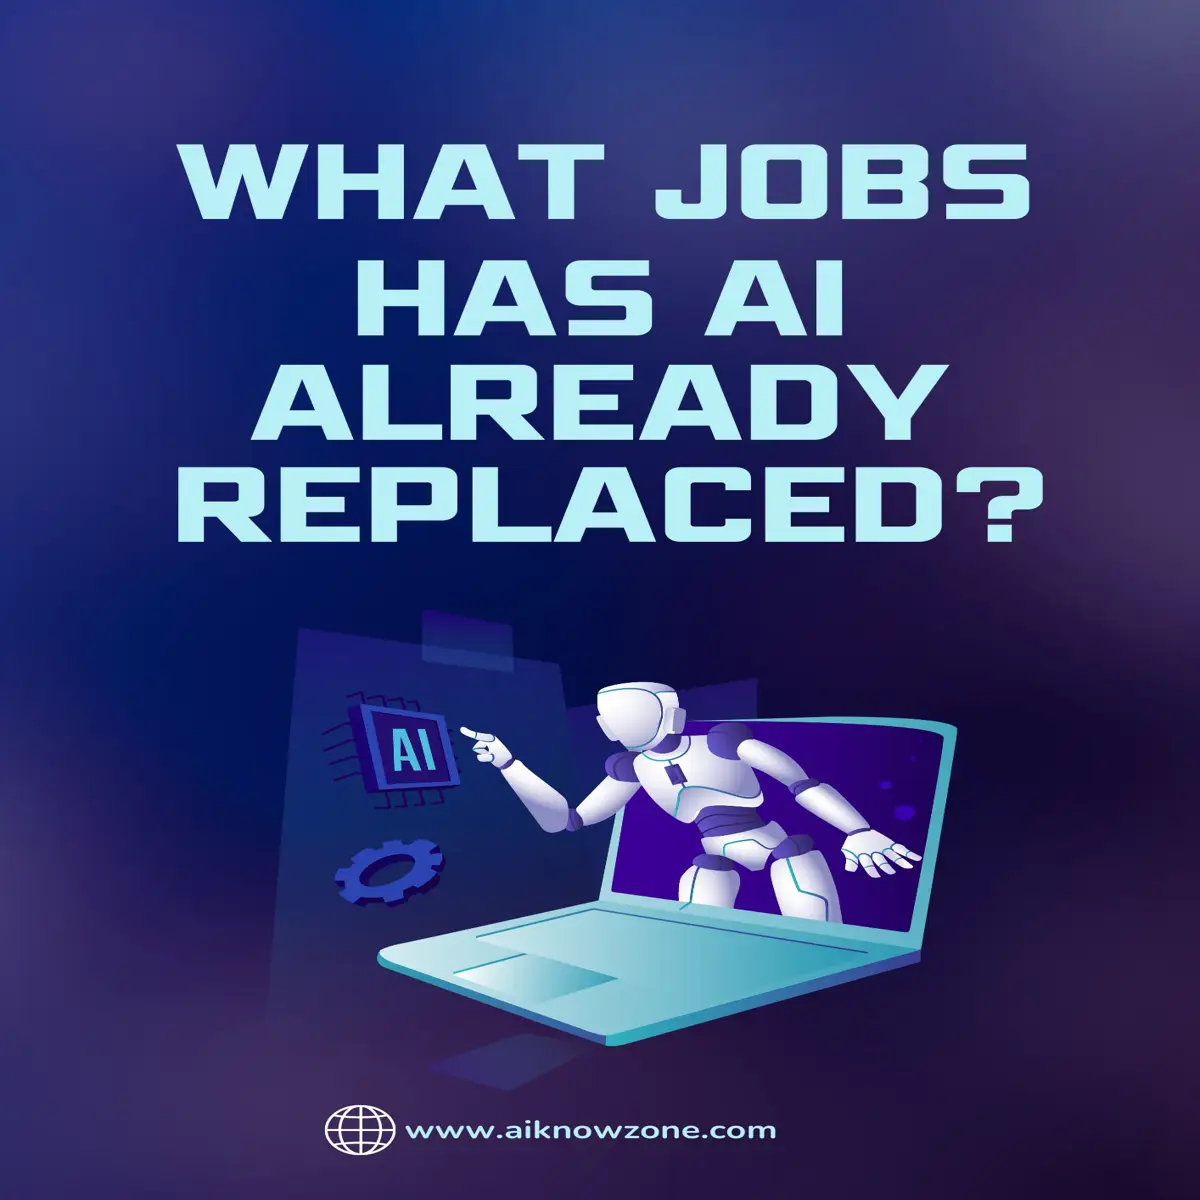 What jobs has ai already replaced